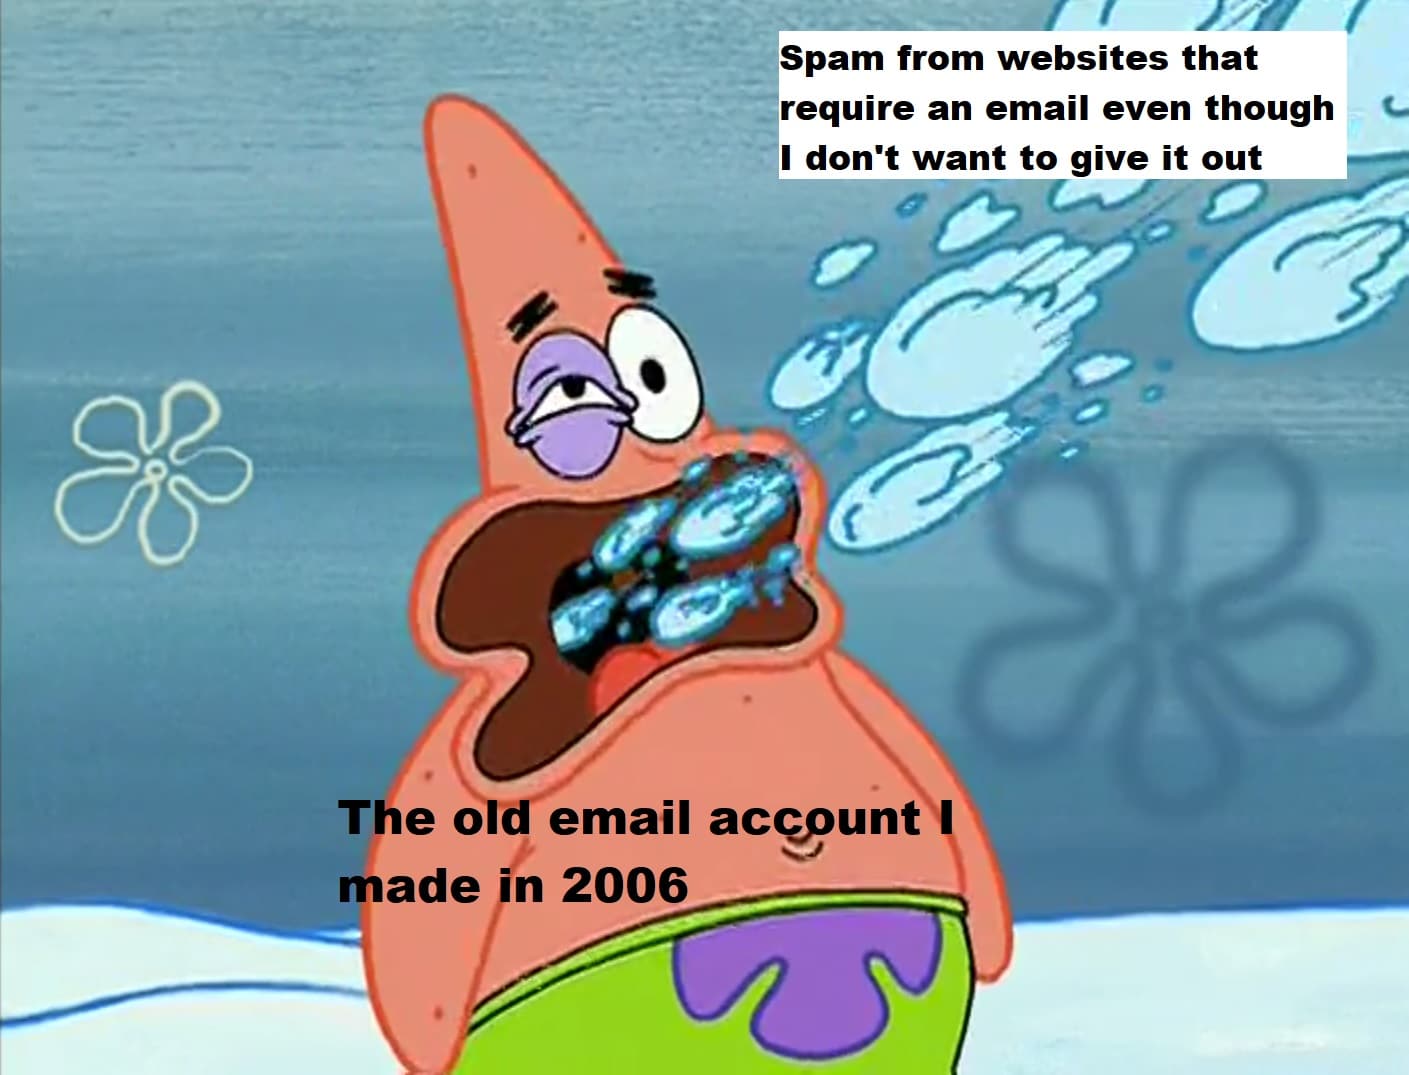 Spongebob, Yahoo, Patrick Spongebob Memes Spongebob, Yahoo, Patrick text: Spam from websites that require an email even though - I don't want to give it out Theol email acqpunt made n 2006 